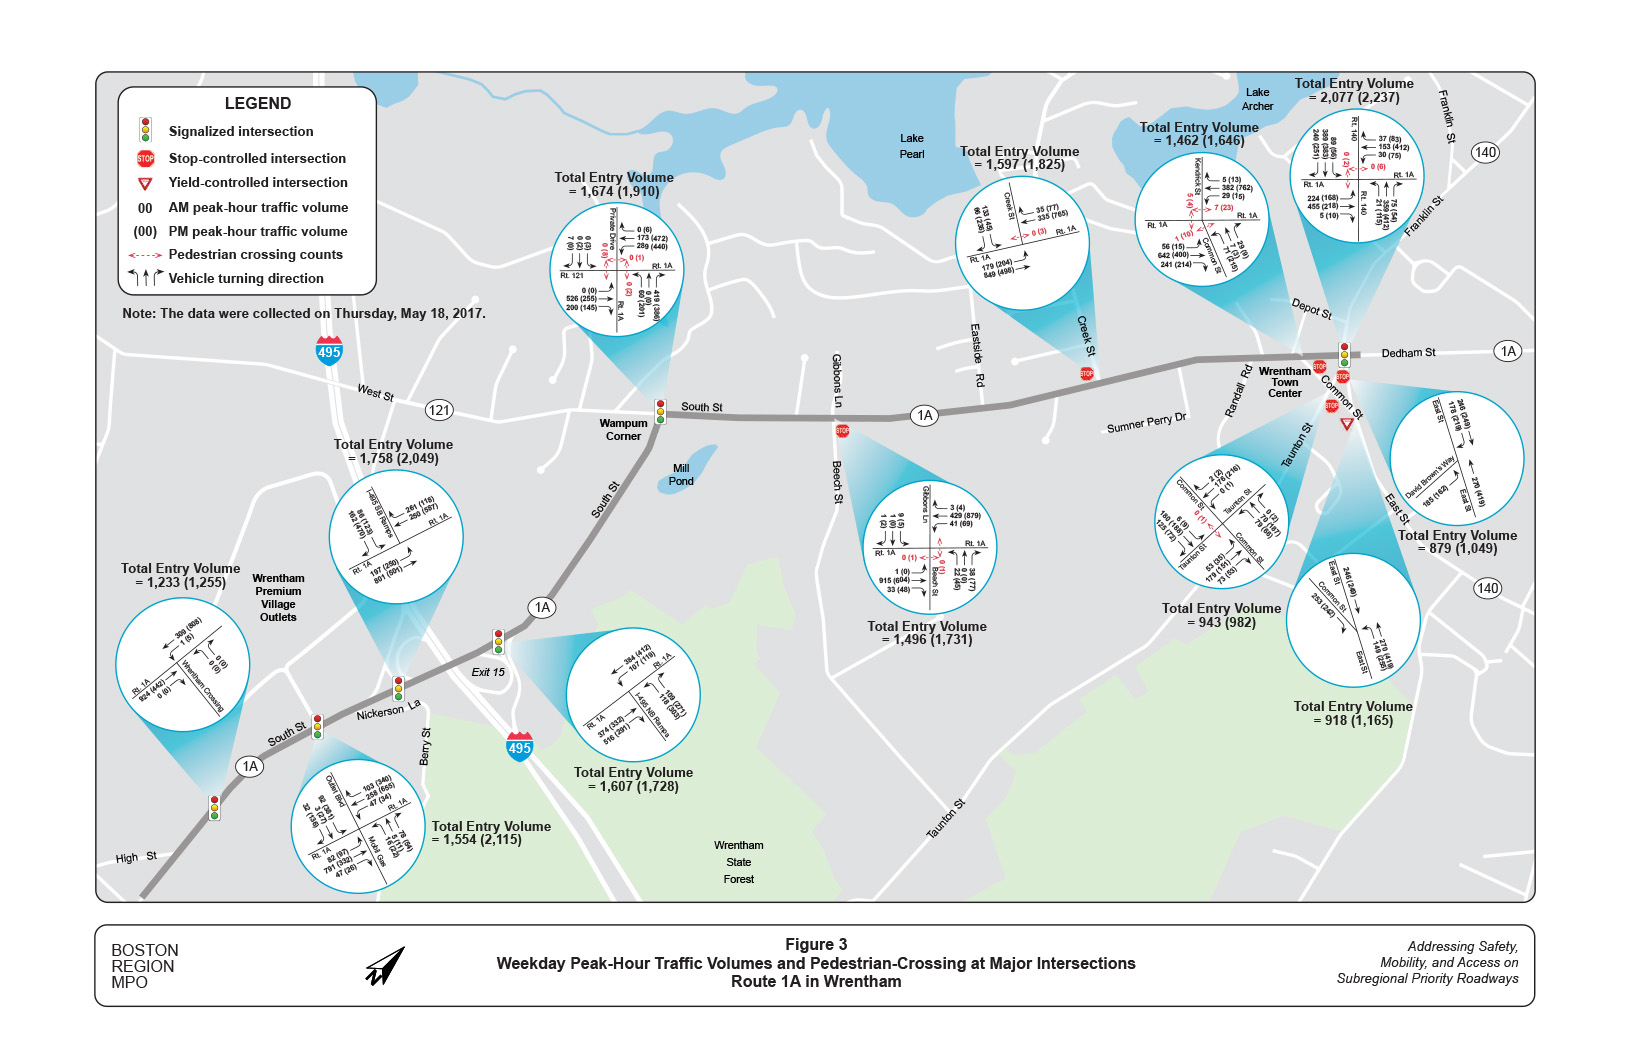 Figure 3 is a map with diagrams showing weekday peak-hour traffic and pedestrian volumes at major intersections on Route 1A in Wrentham.